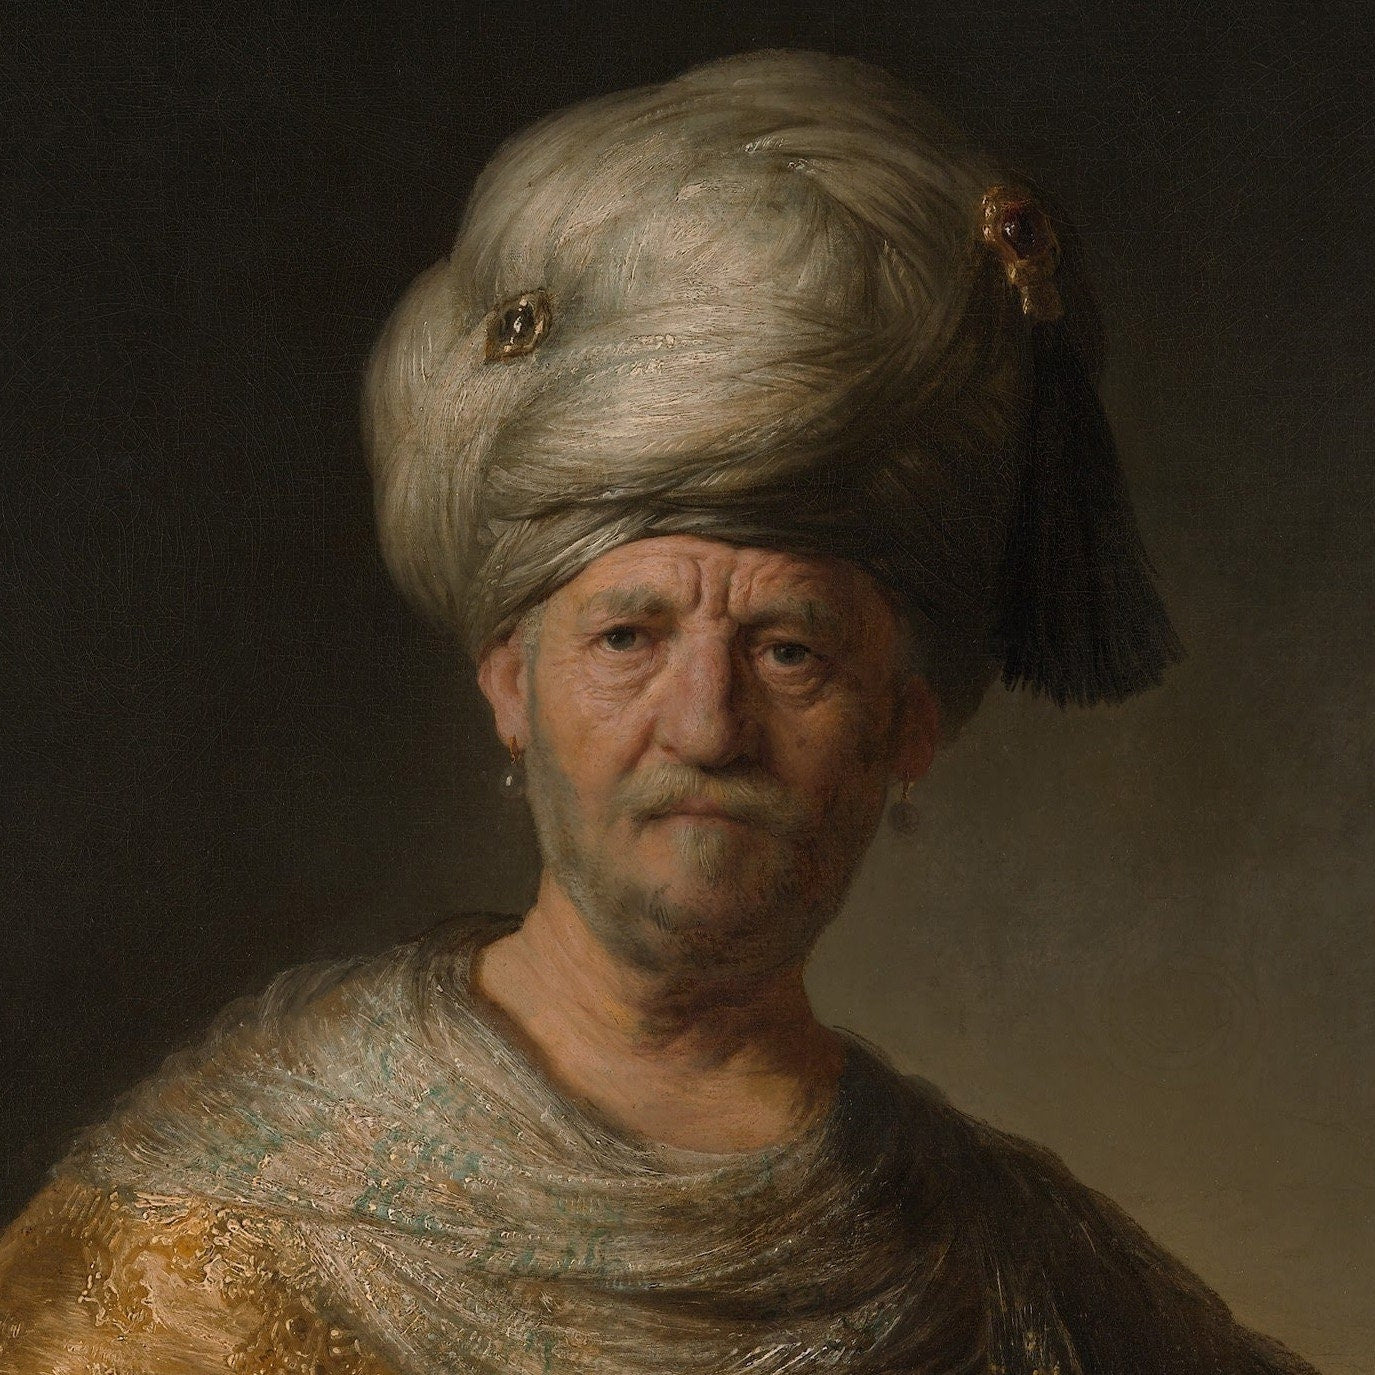 Man in Oriental Costume by Rembrandt, 3d Printed with texture and brush strokes looks like original oil-painting, code:234